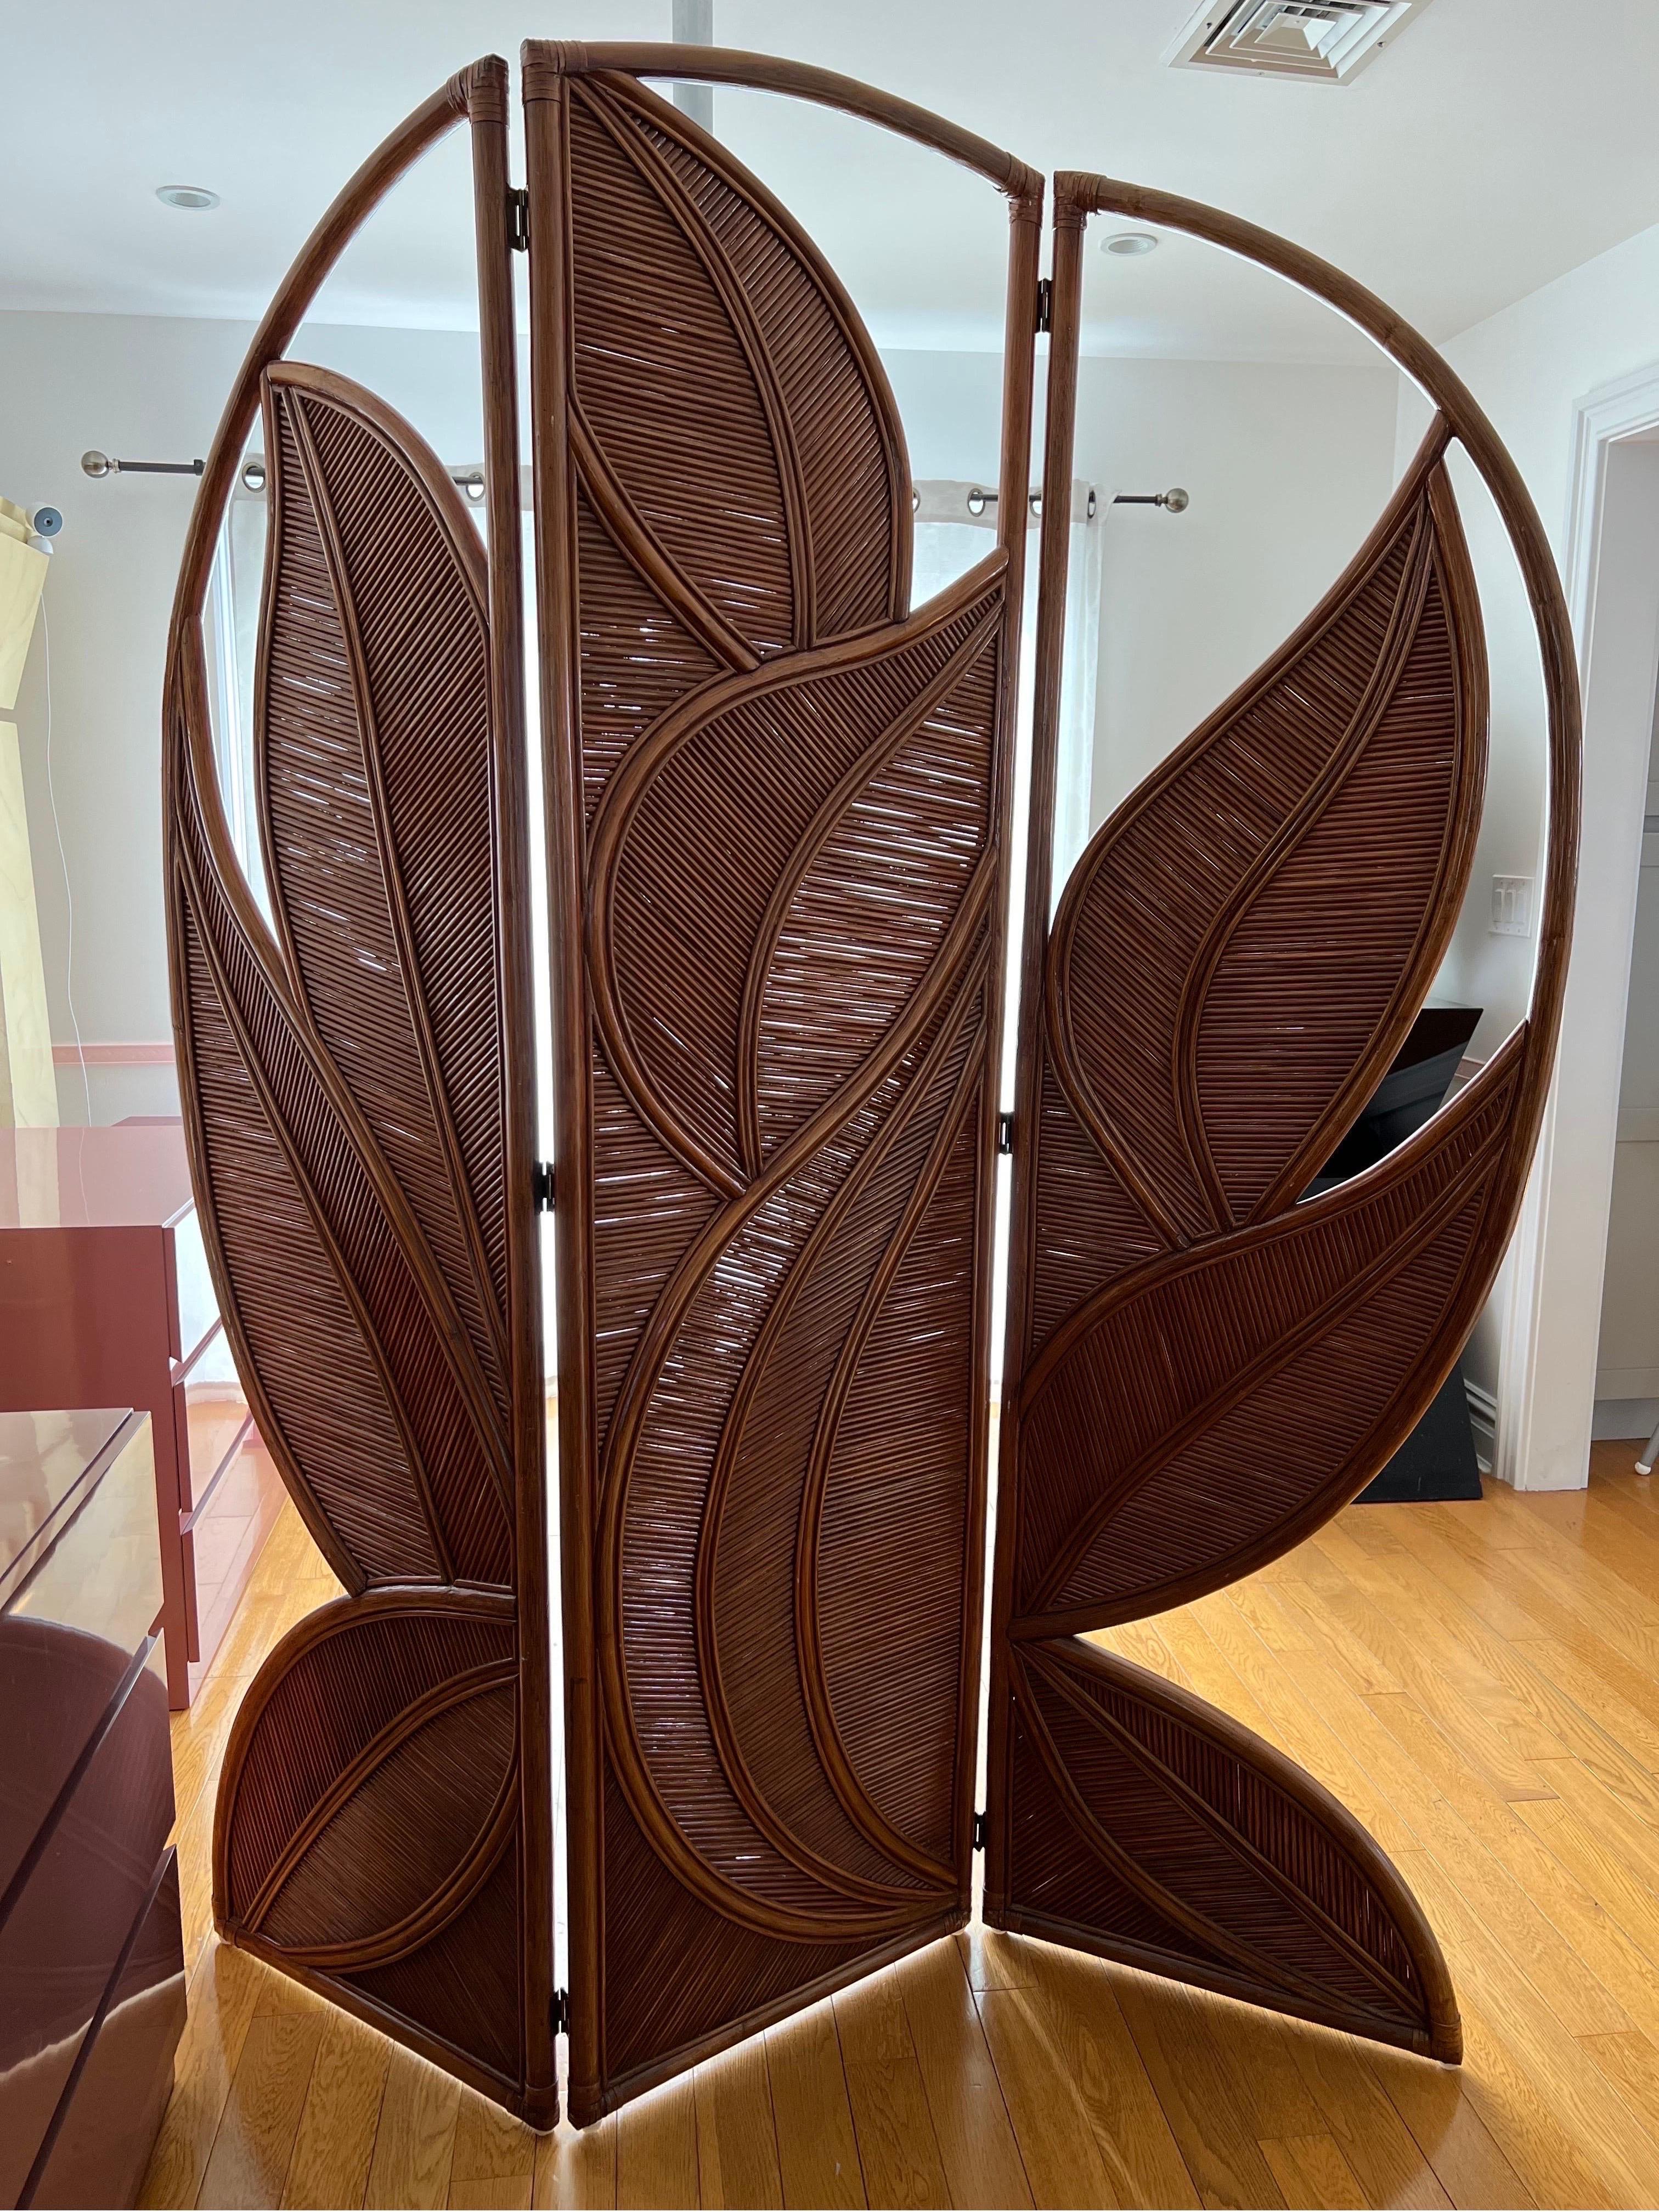 1970 Pencil Reed Rattan Room Divider in the Style of Gabrielle Crespi.

Owner bought this beautiful room divider back in 1970 and has kept this in its original shape as best as they could. Overall amazing vintage condition. The wood stain color is